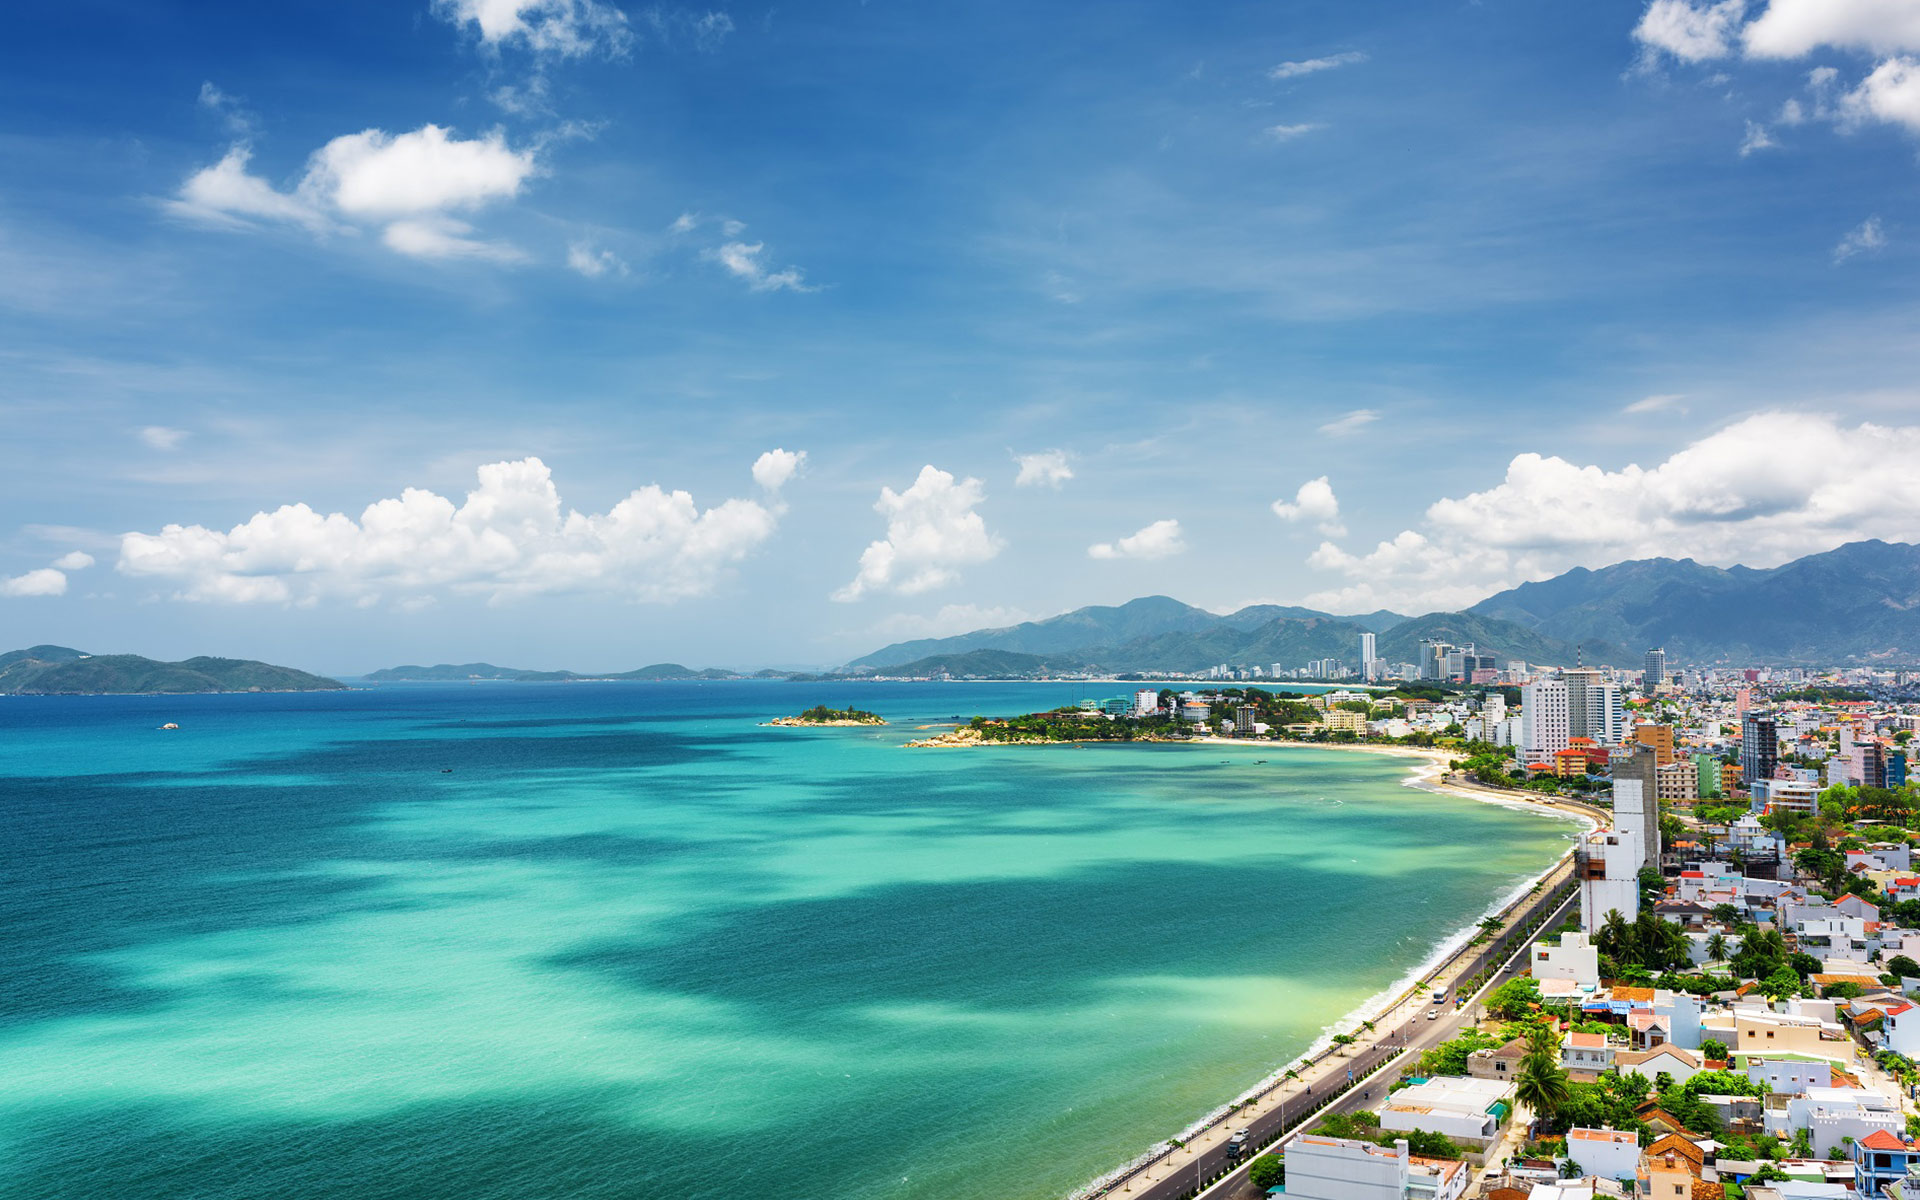 Nha Trang is well-known all around the world for its white sandy beaches and islands, rich marine life, fascinating historical sights and active nightlife.